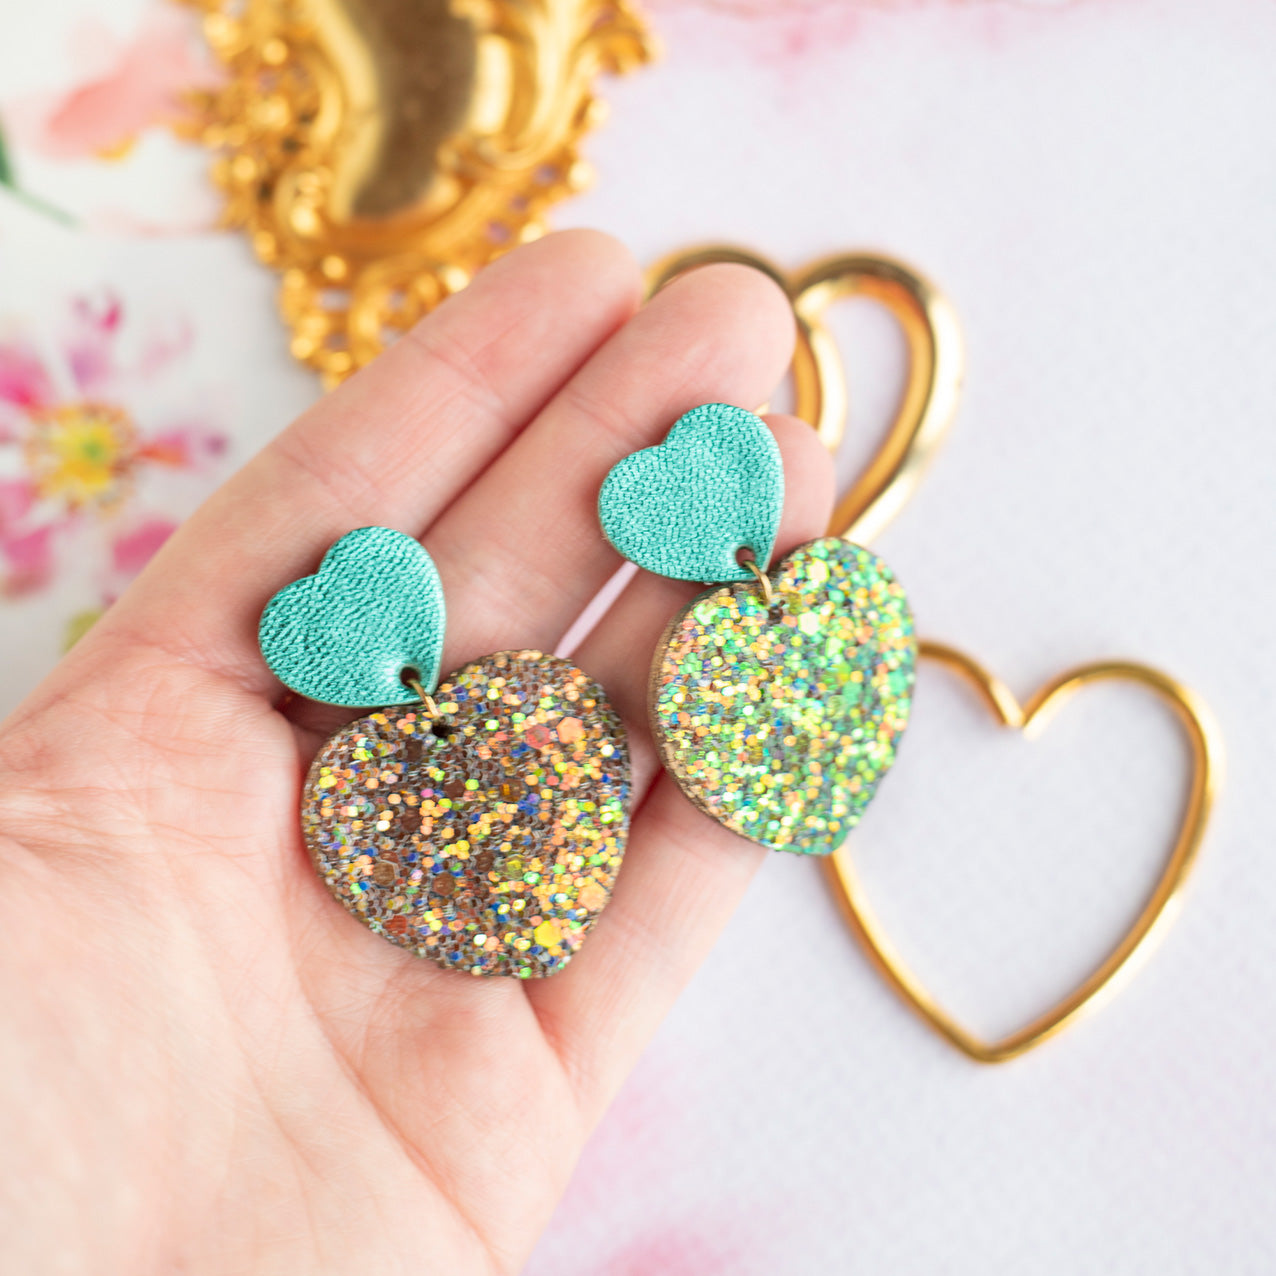 Heart earrings - metallic turquoise leather and iridescent sequins